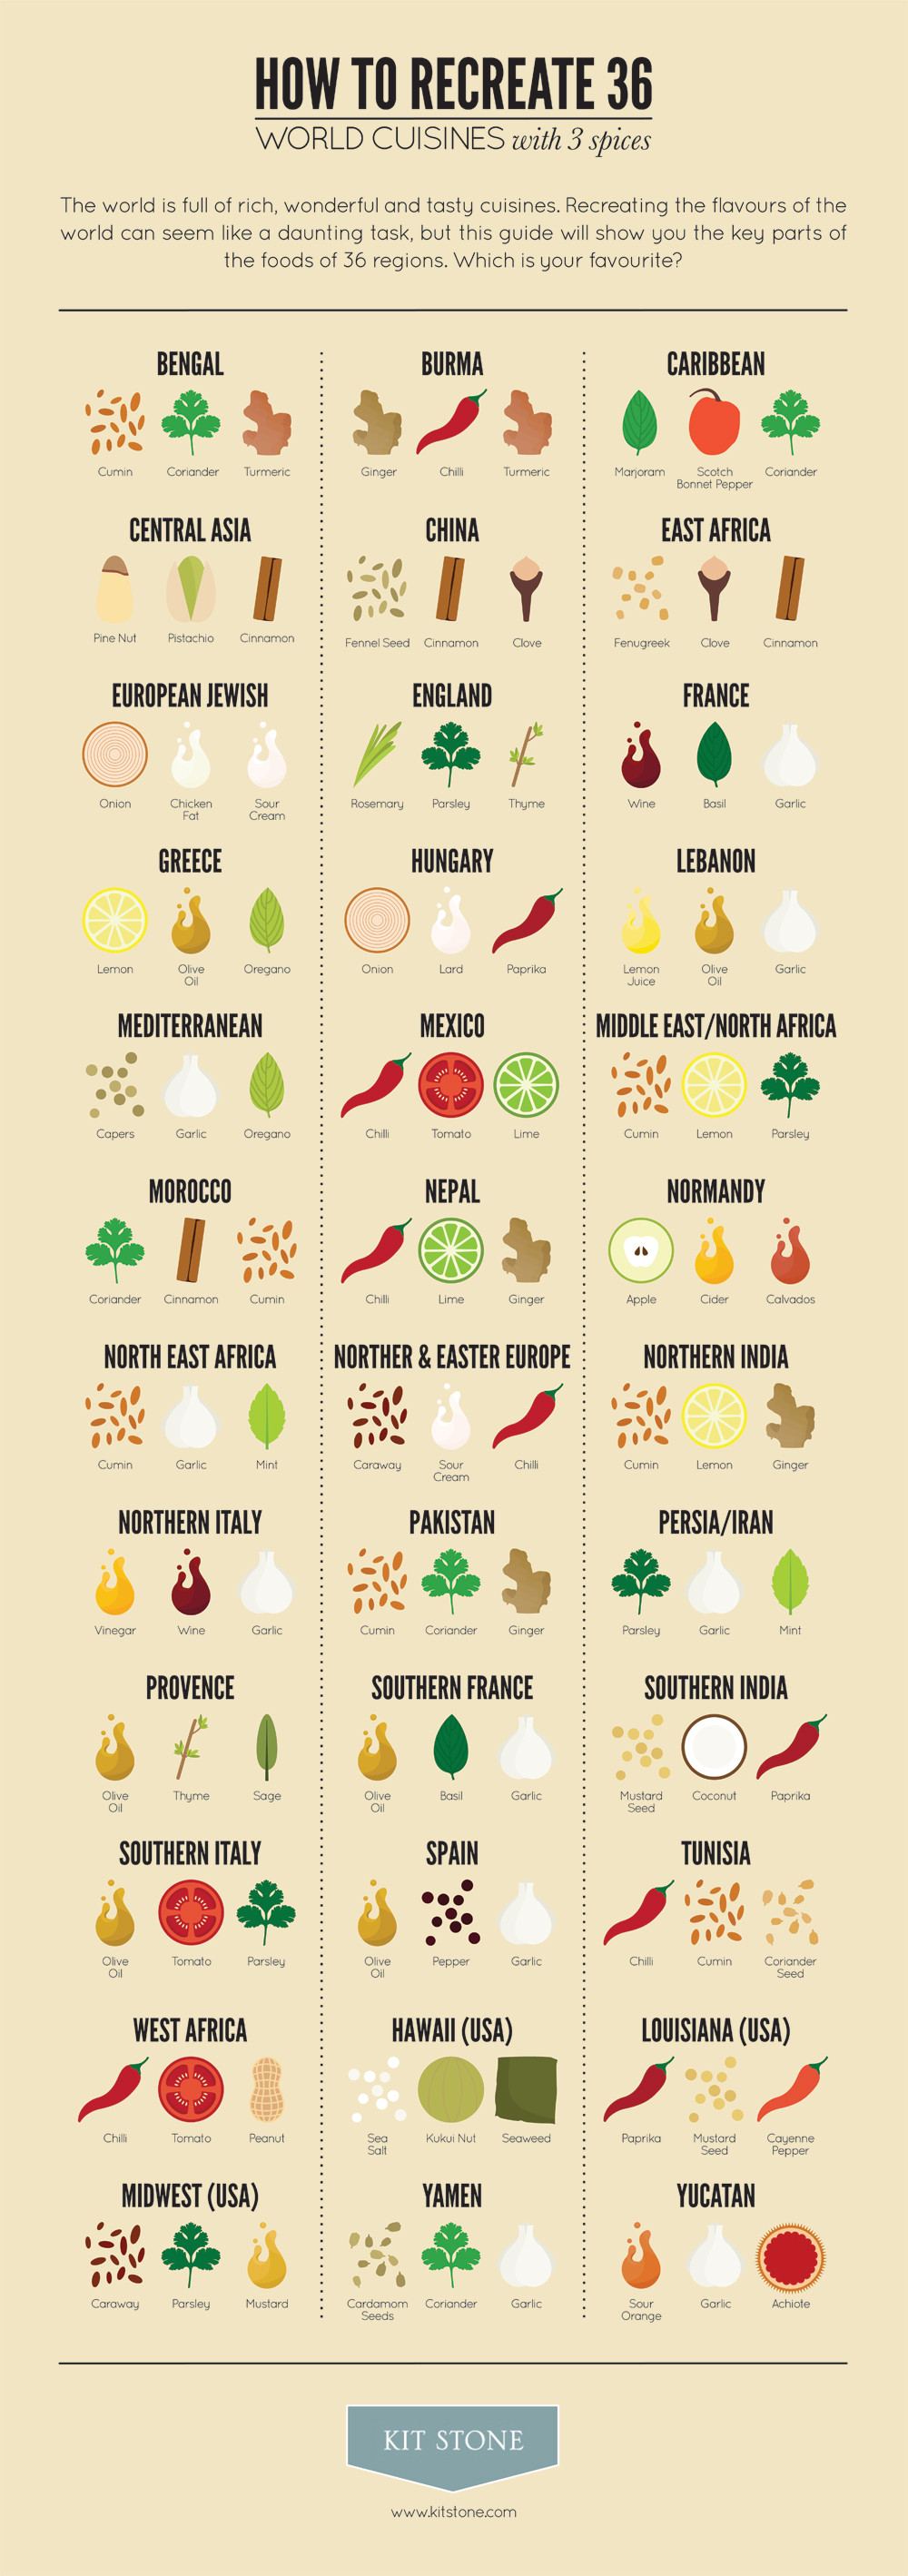 Infographic: How to Recreate 36 Worlds Cuisines with 3 Spices 